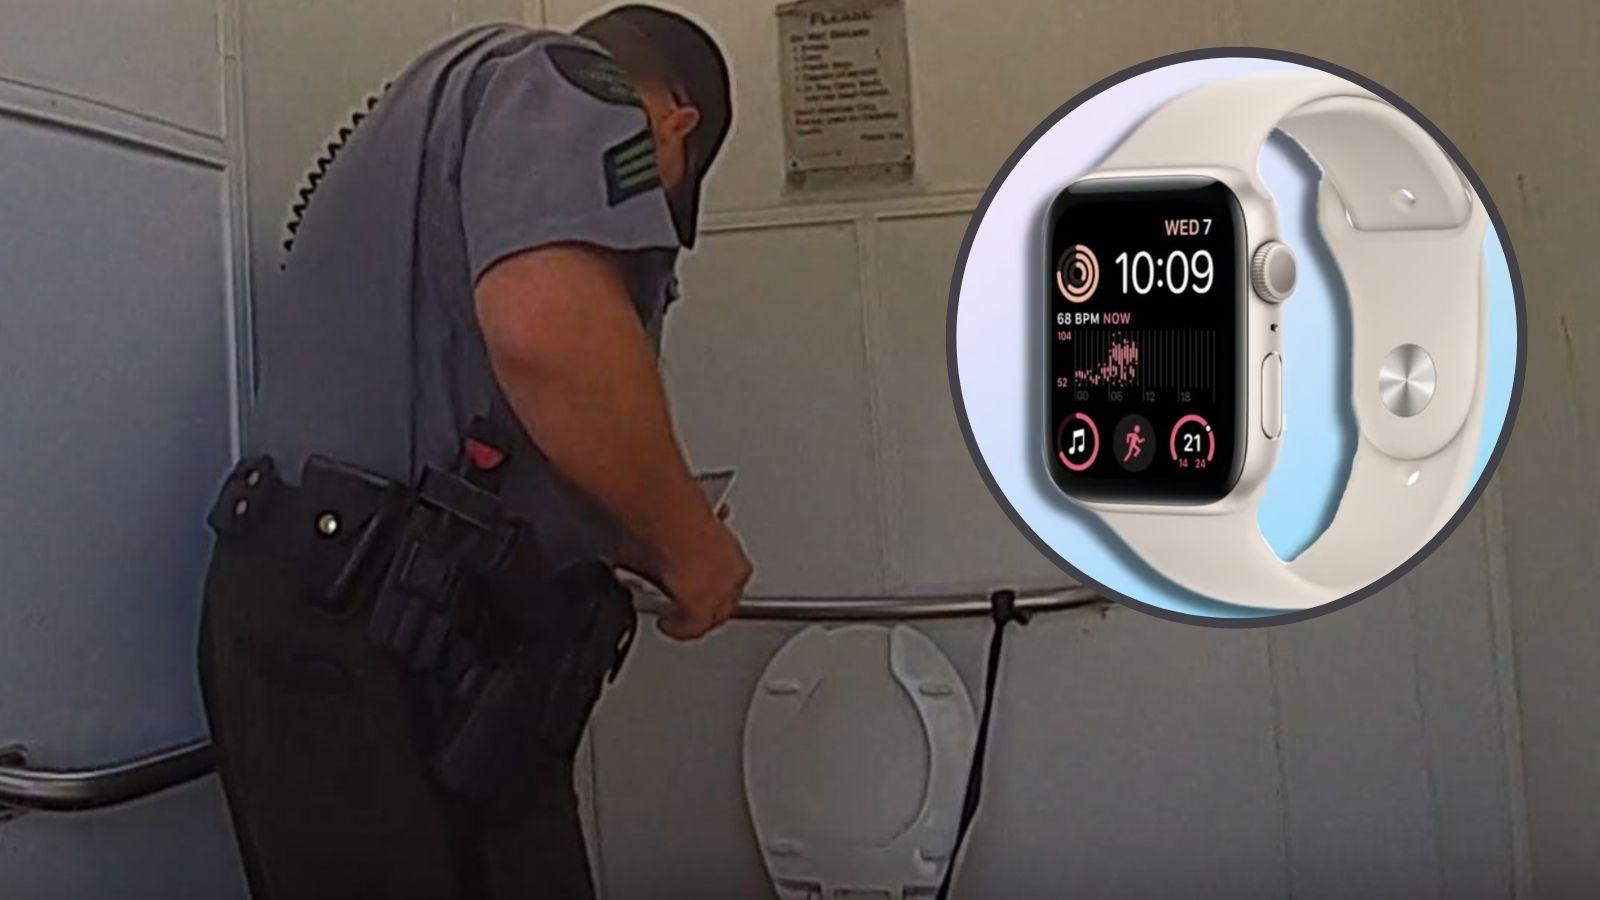 Woman trapped in toilet after saving Apple watch